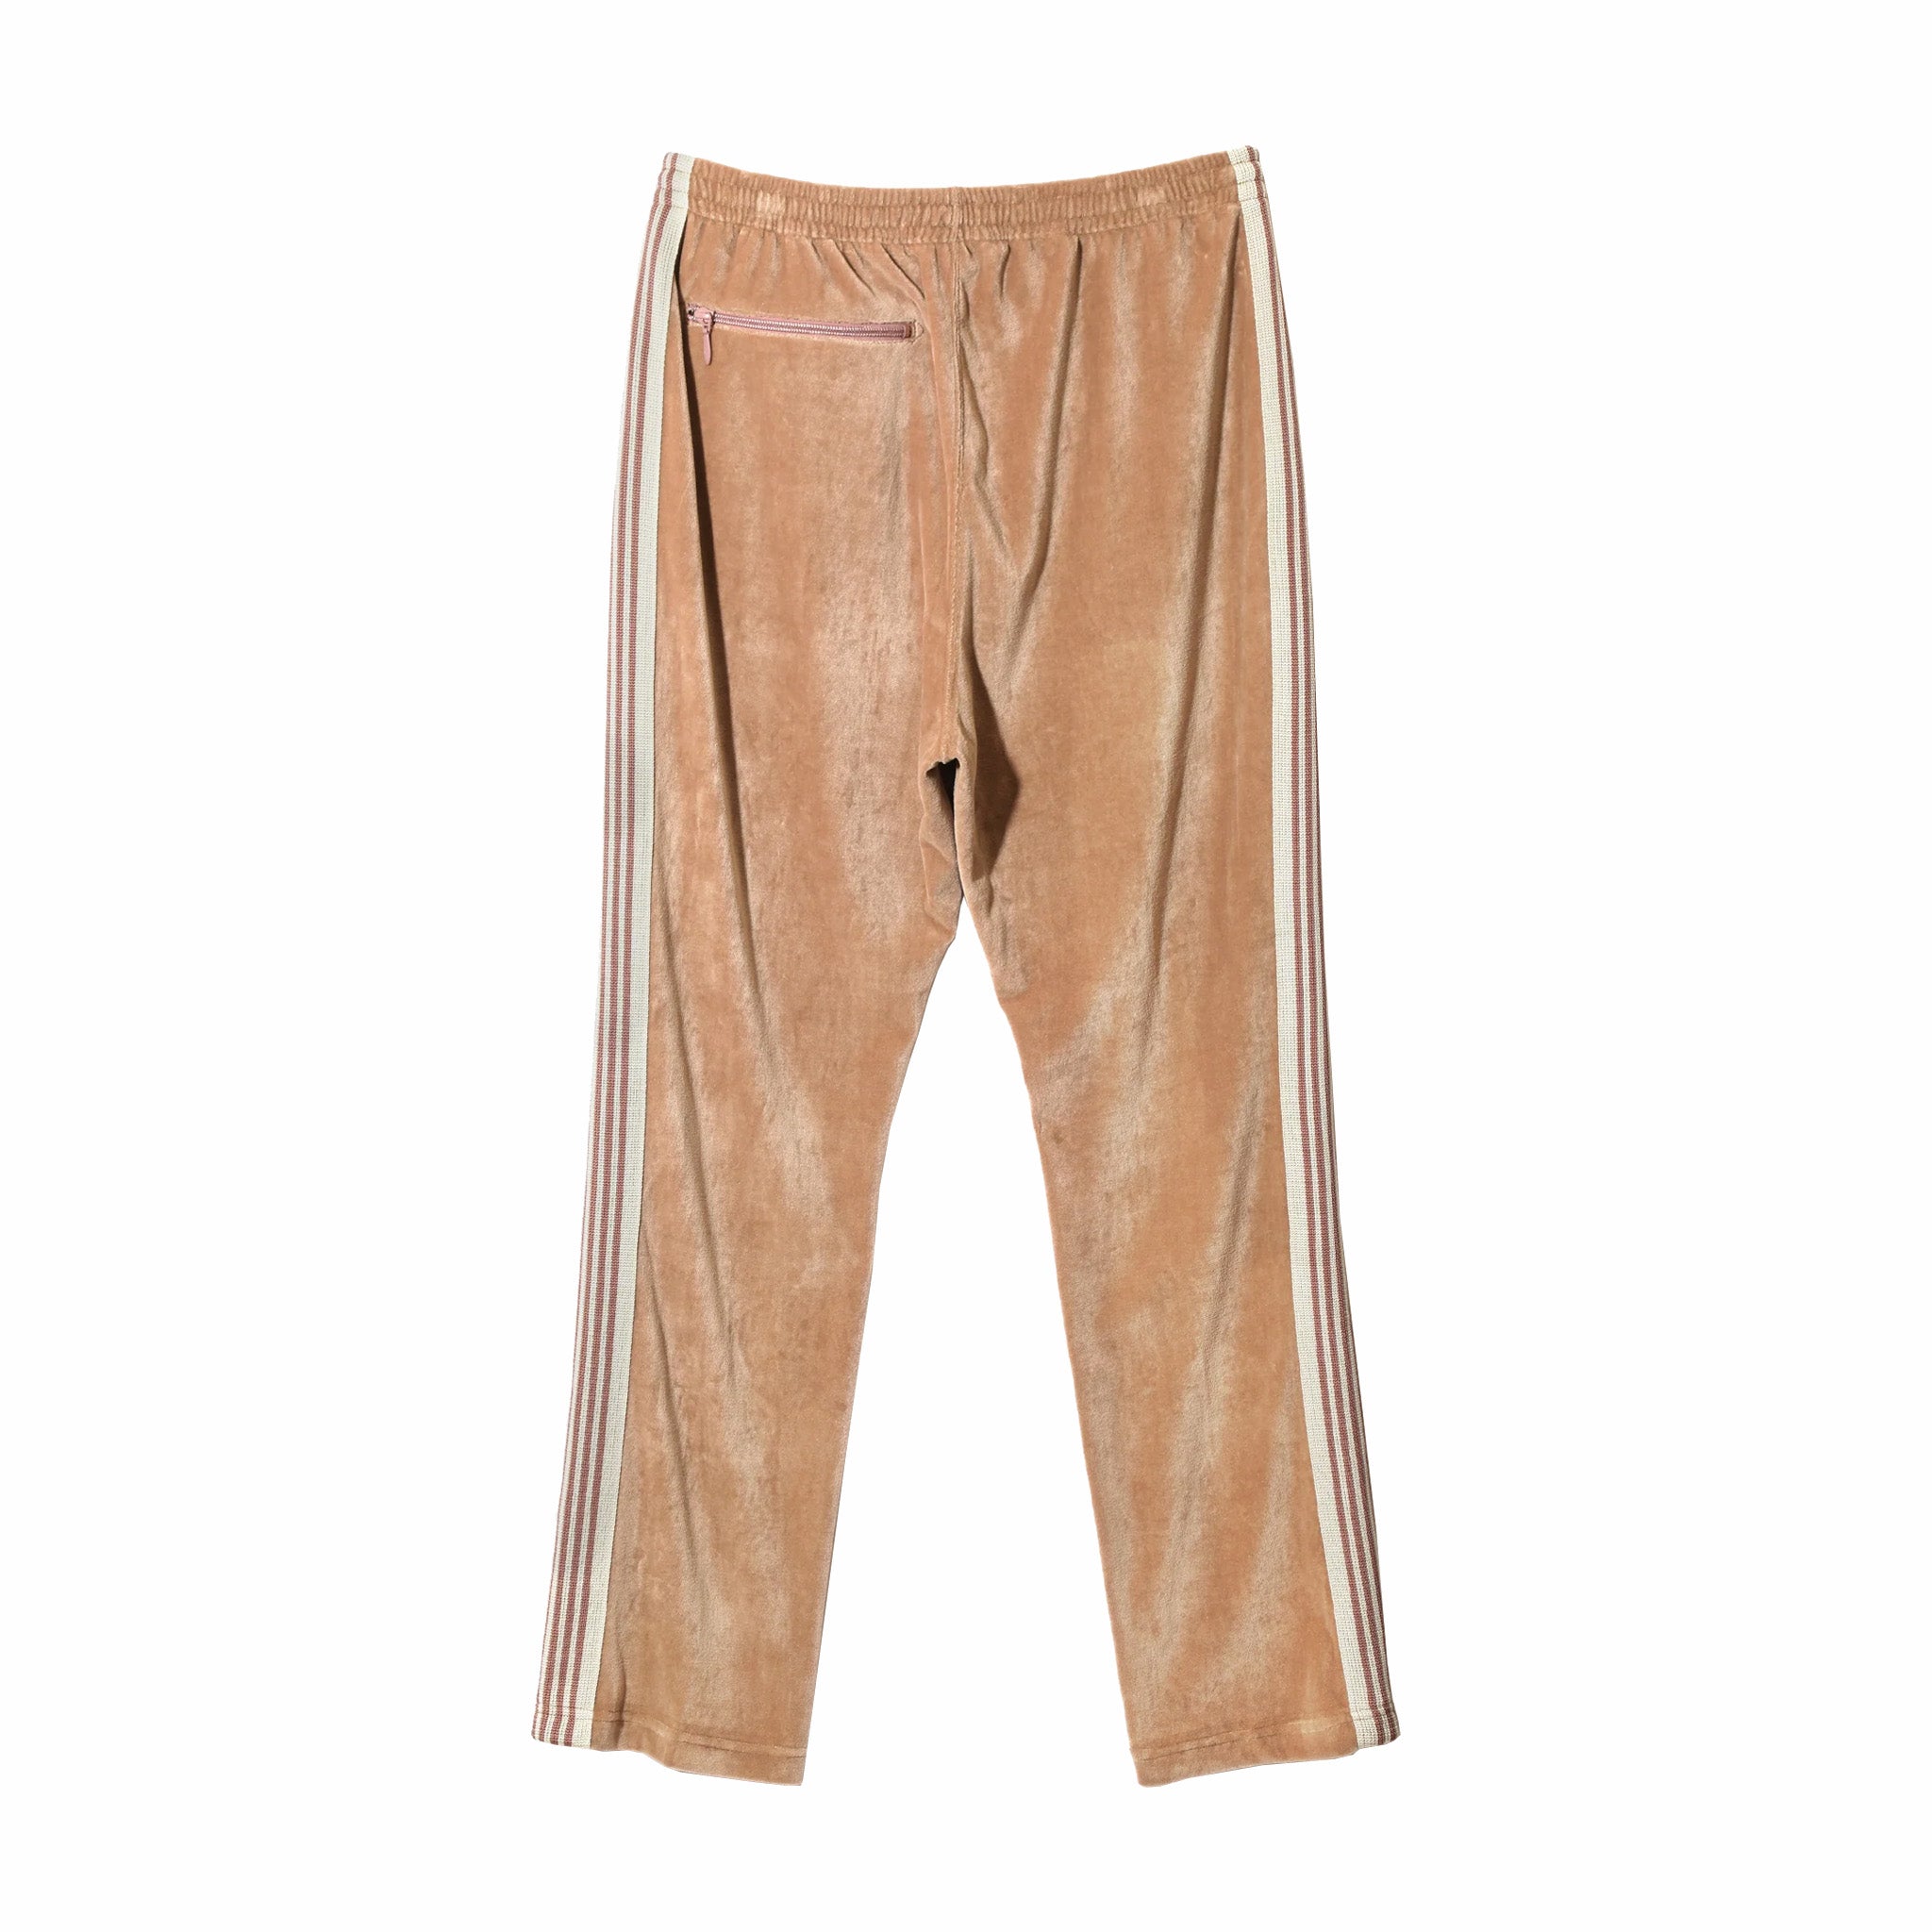 Needles Narrow Track Pant - C/PE Velour (Old Rose) – August